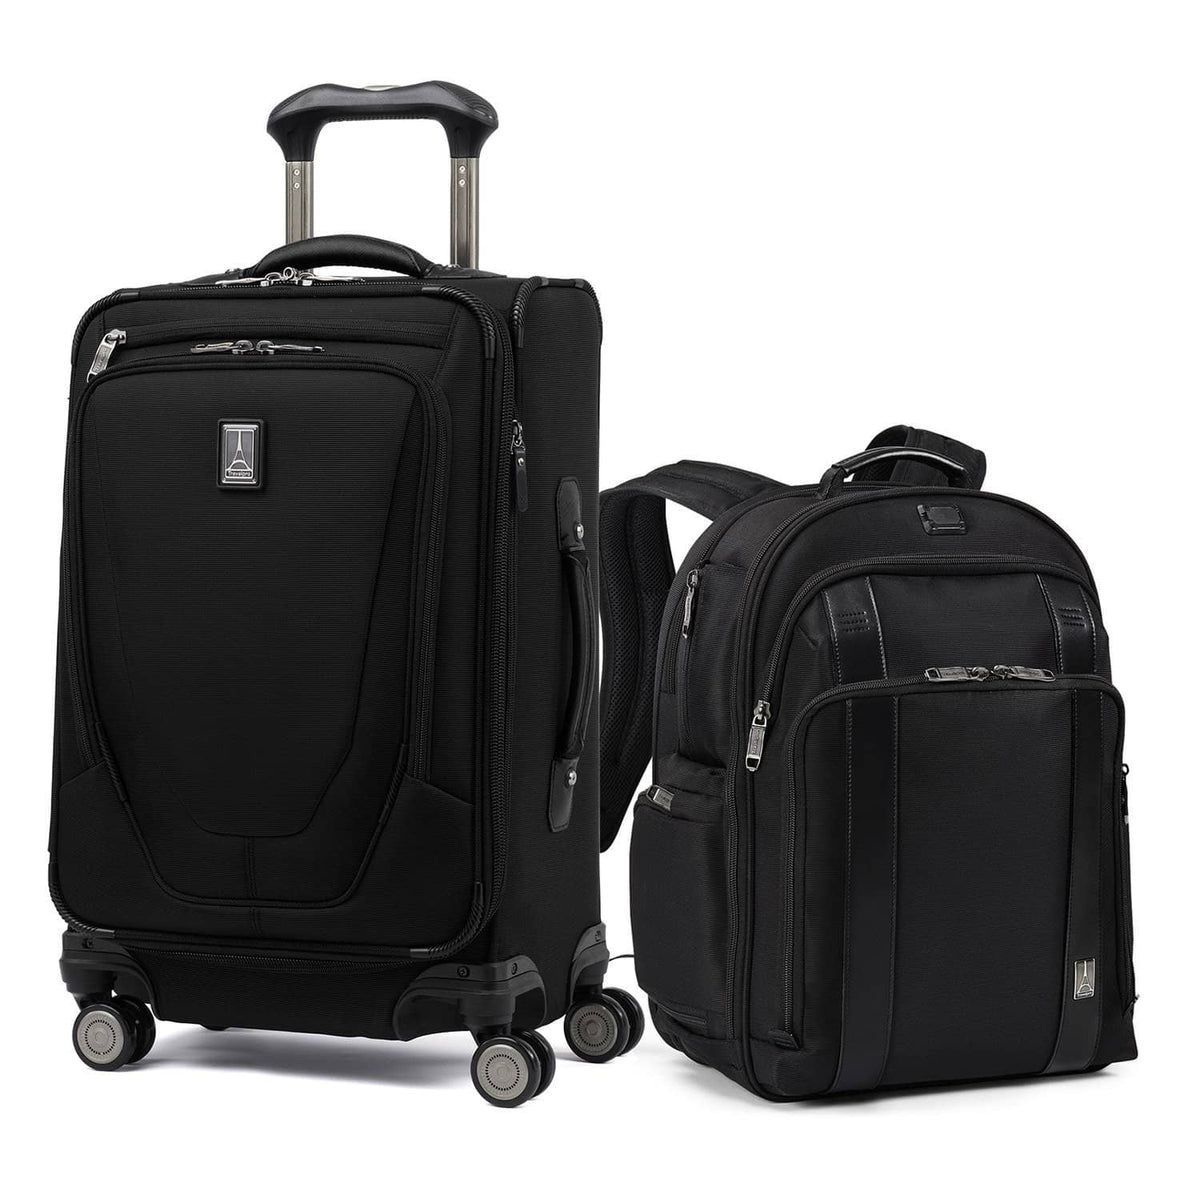 Connected Luggage Set Travelpro